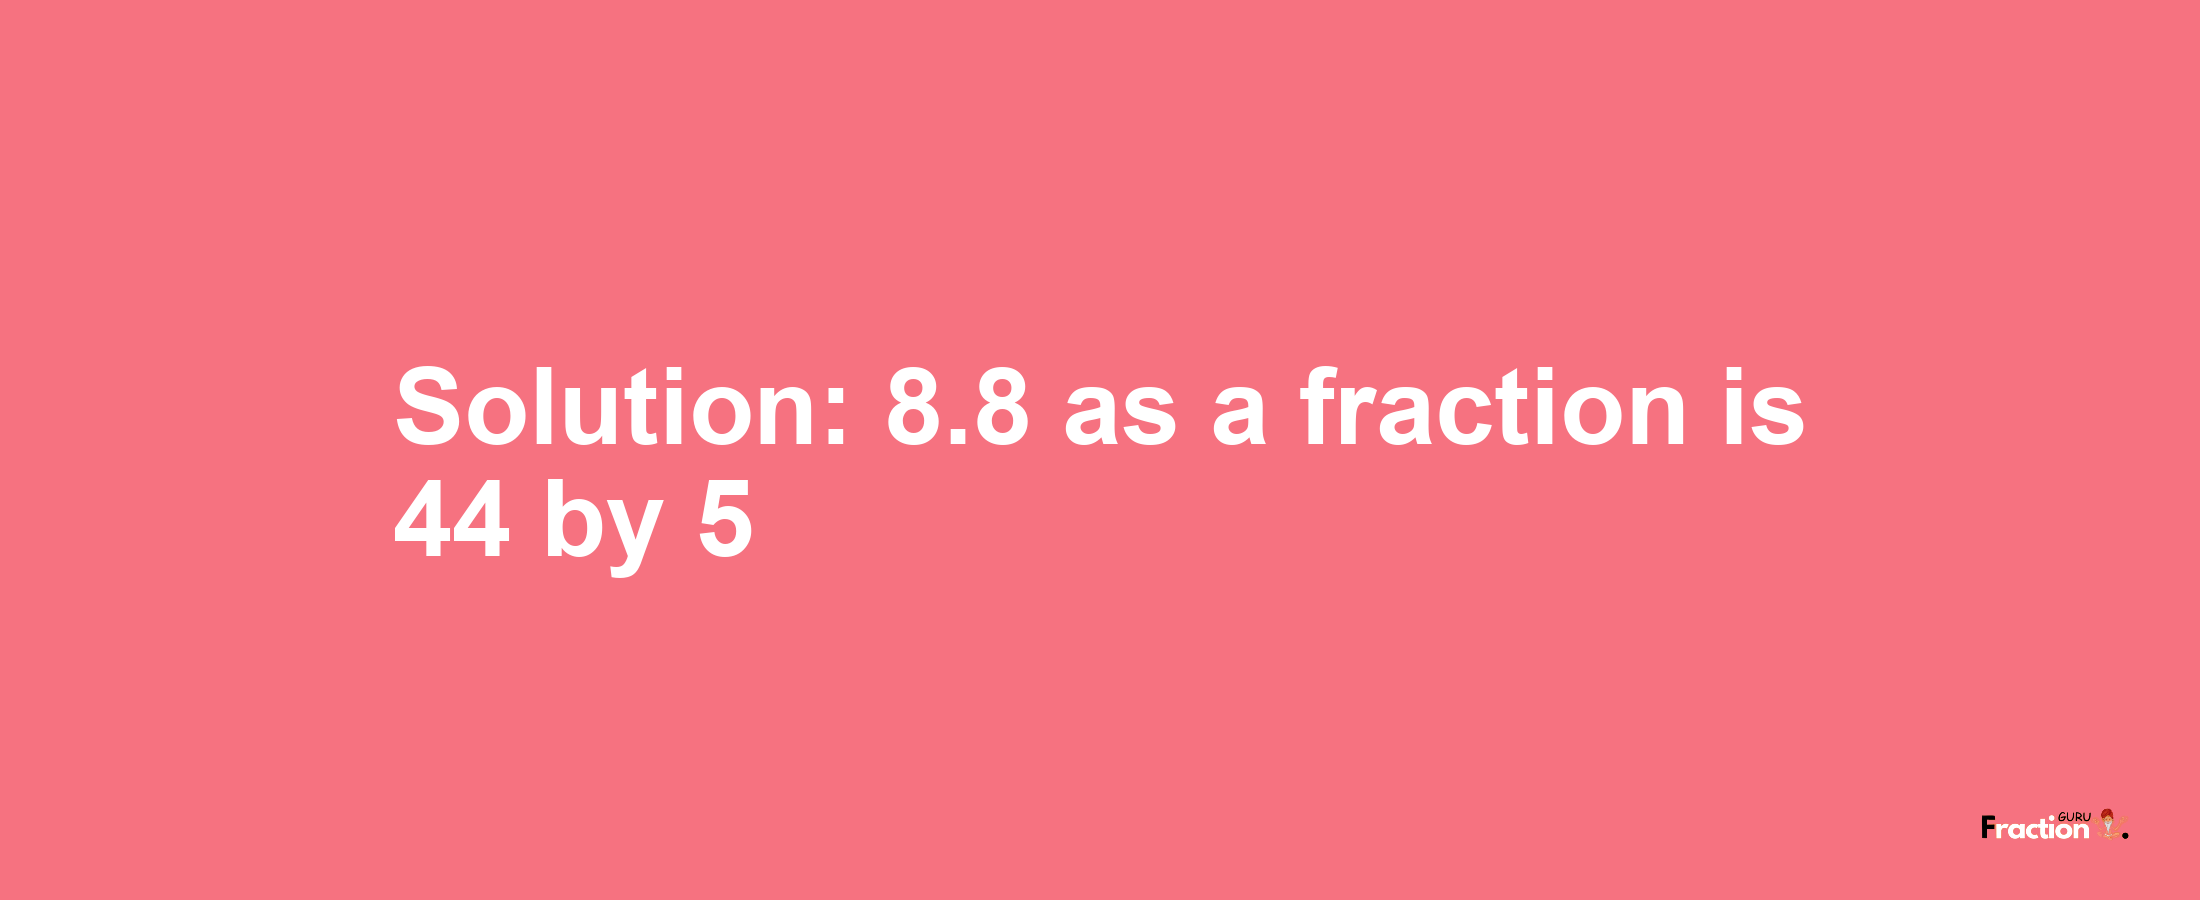 Solution:8.8 as a fraction is 44/5